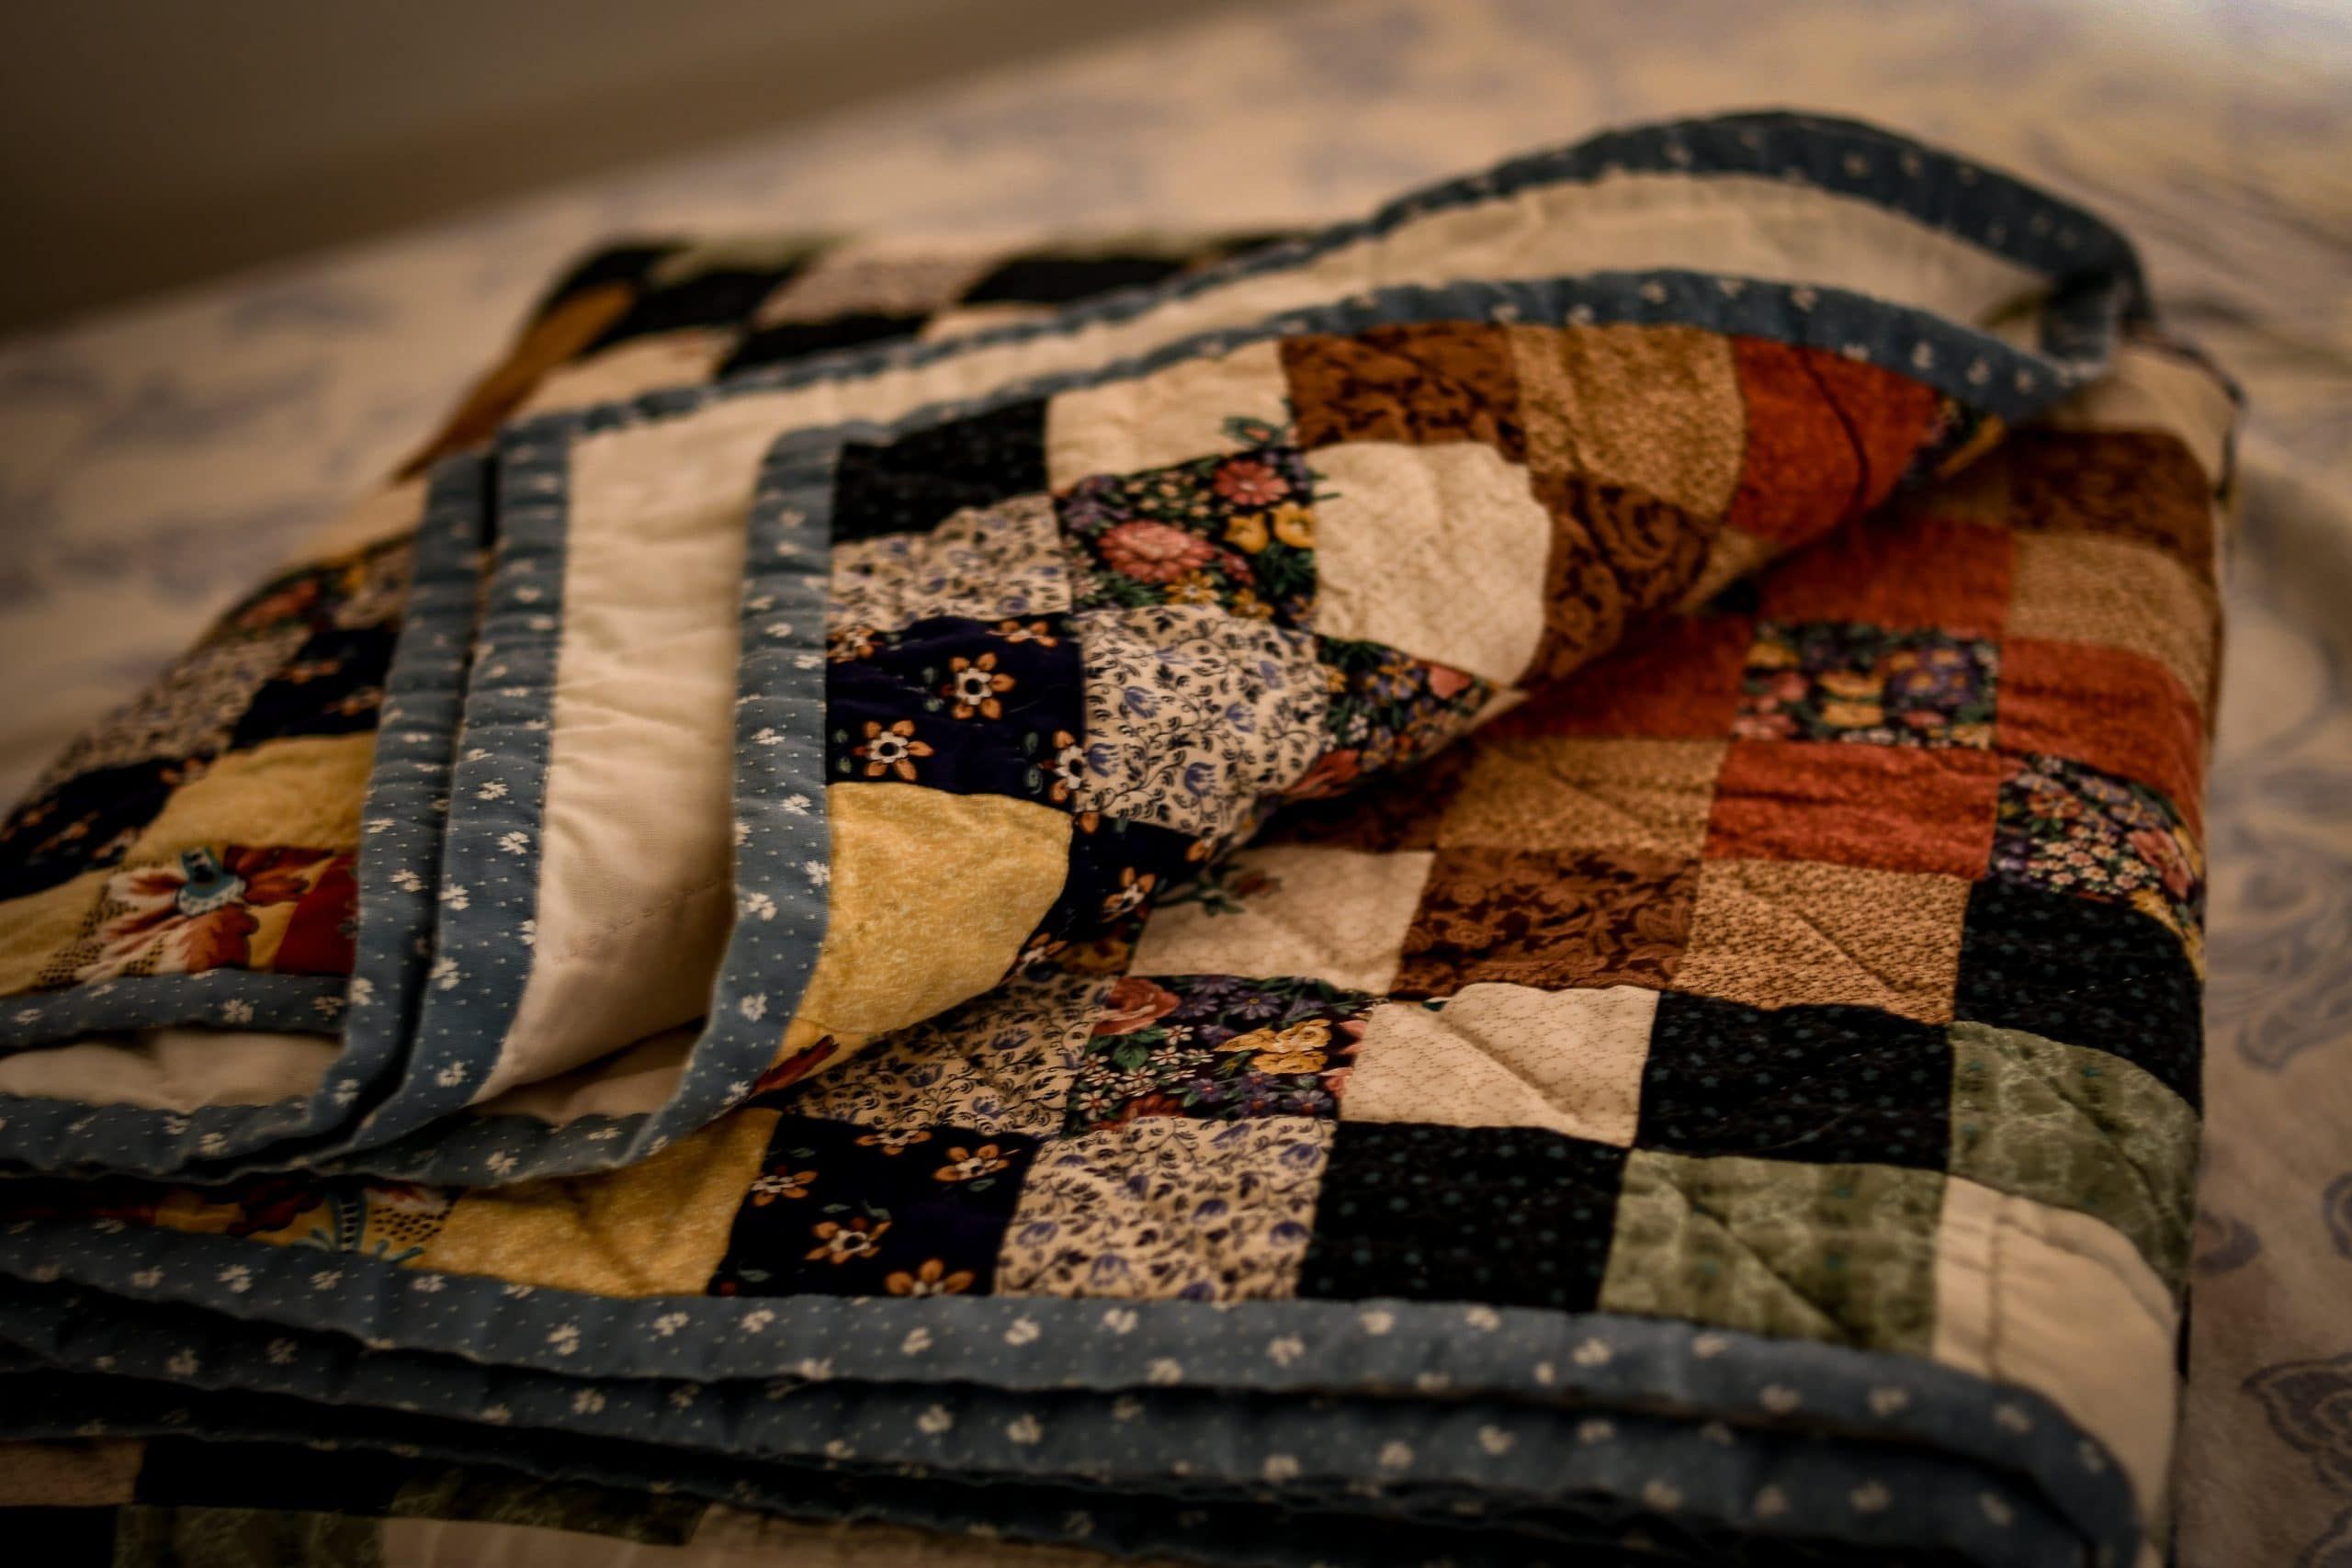 The quilt 1